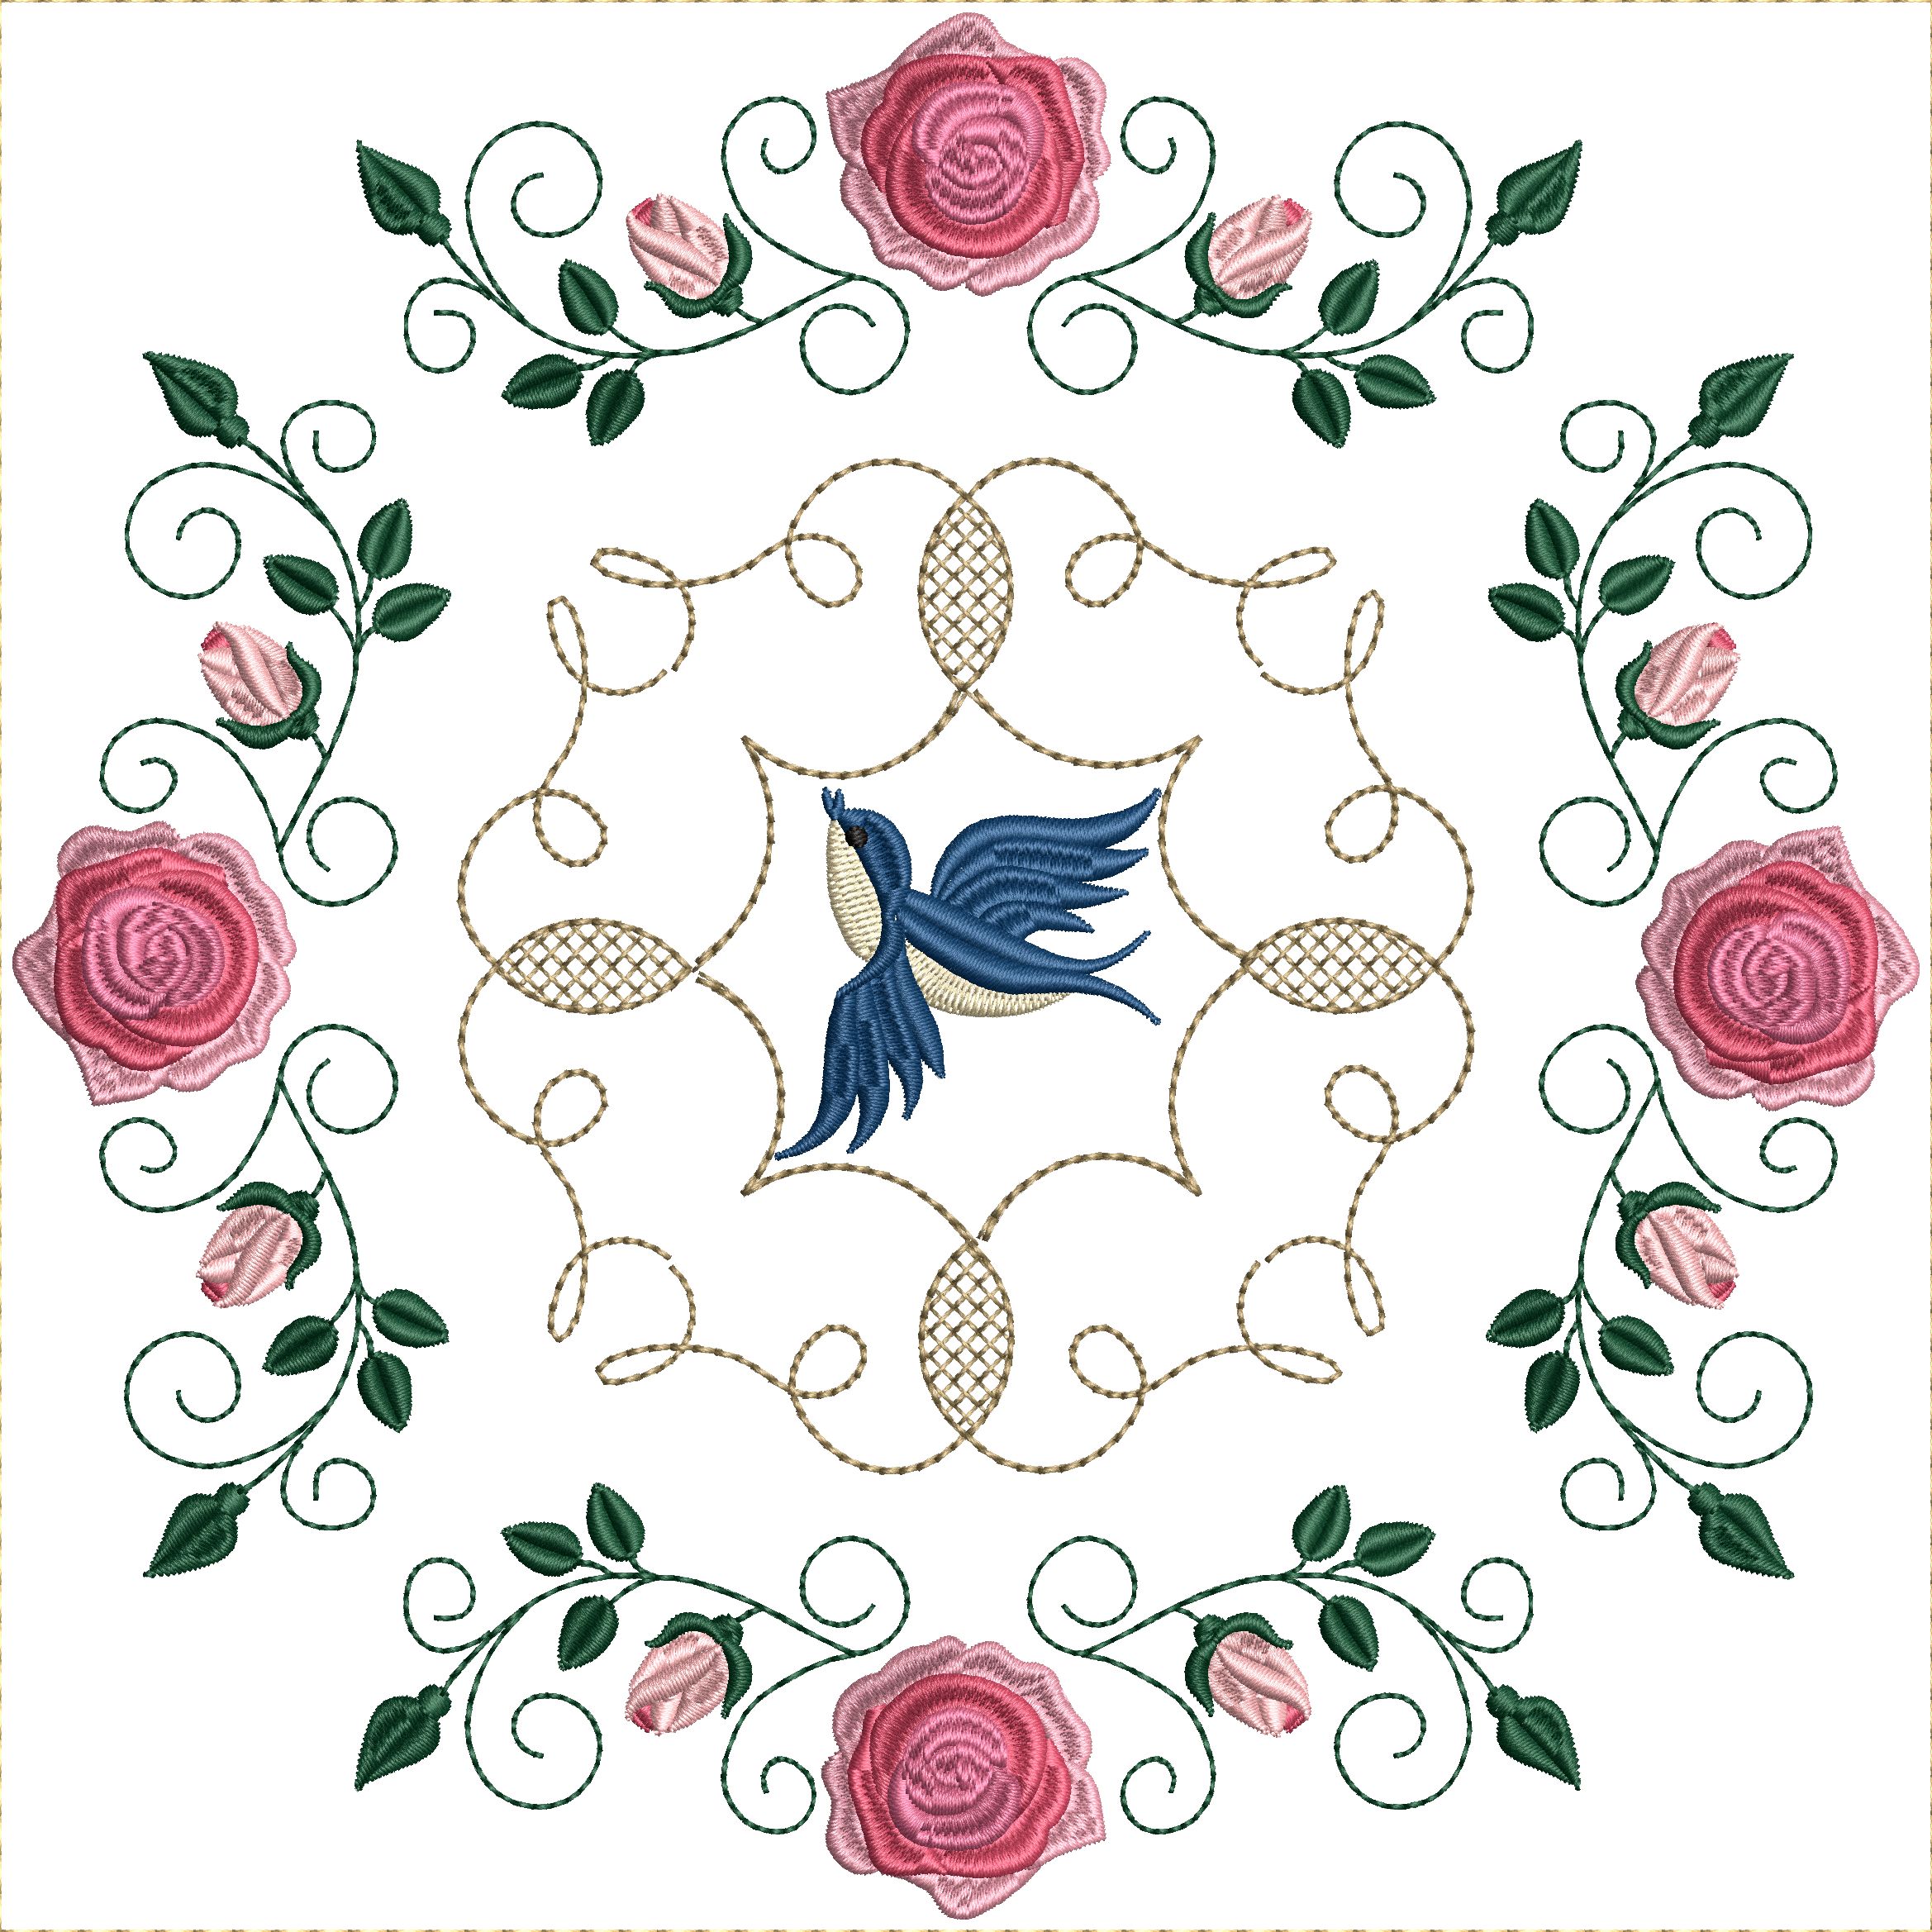 Bluebirds and Roses Quilt Blocks 8x8-7